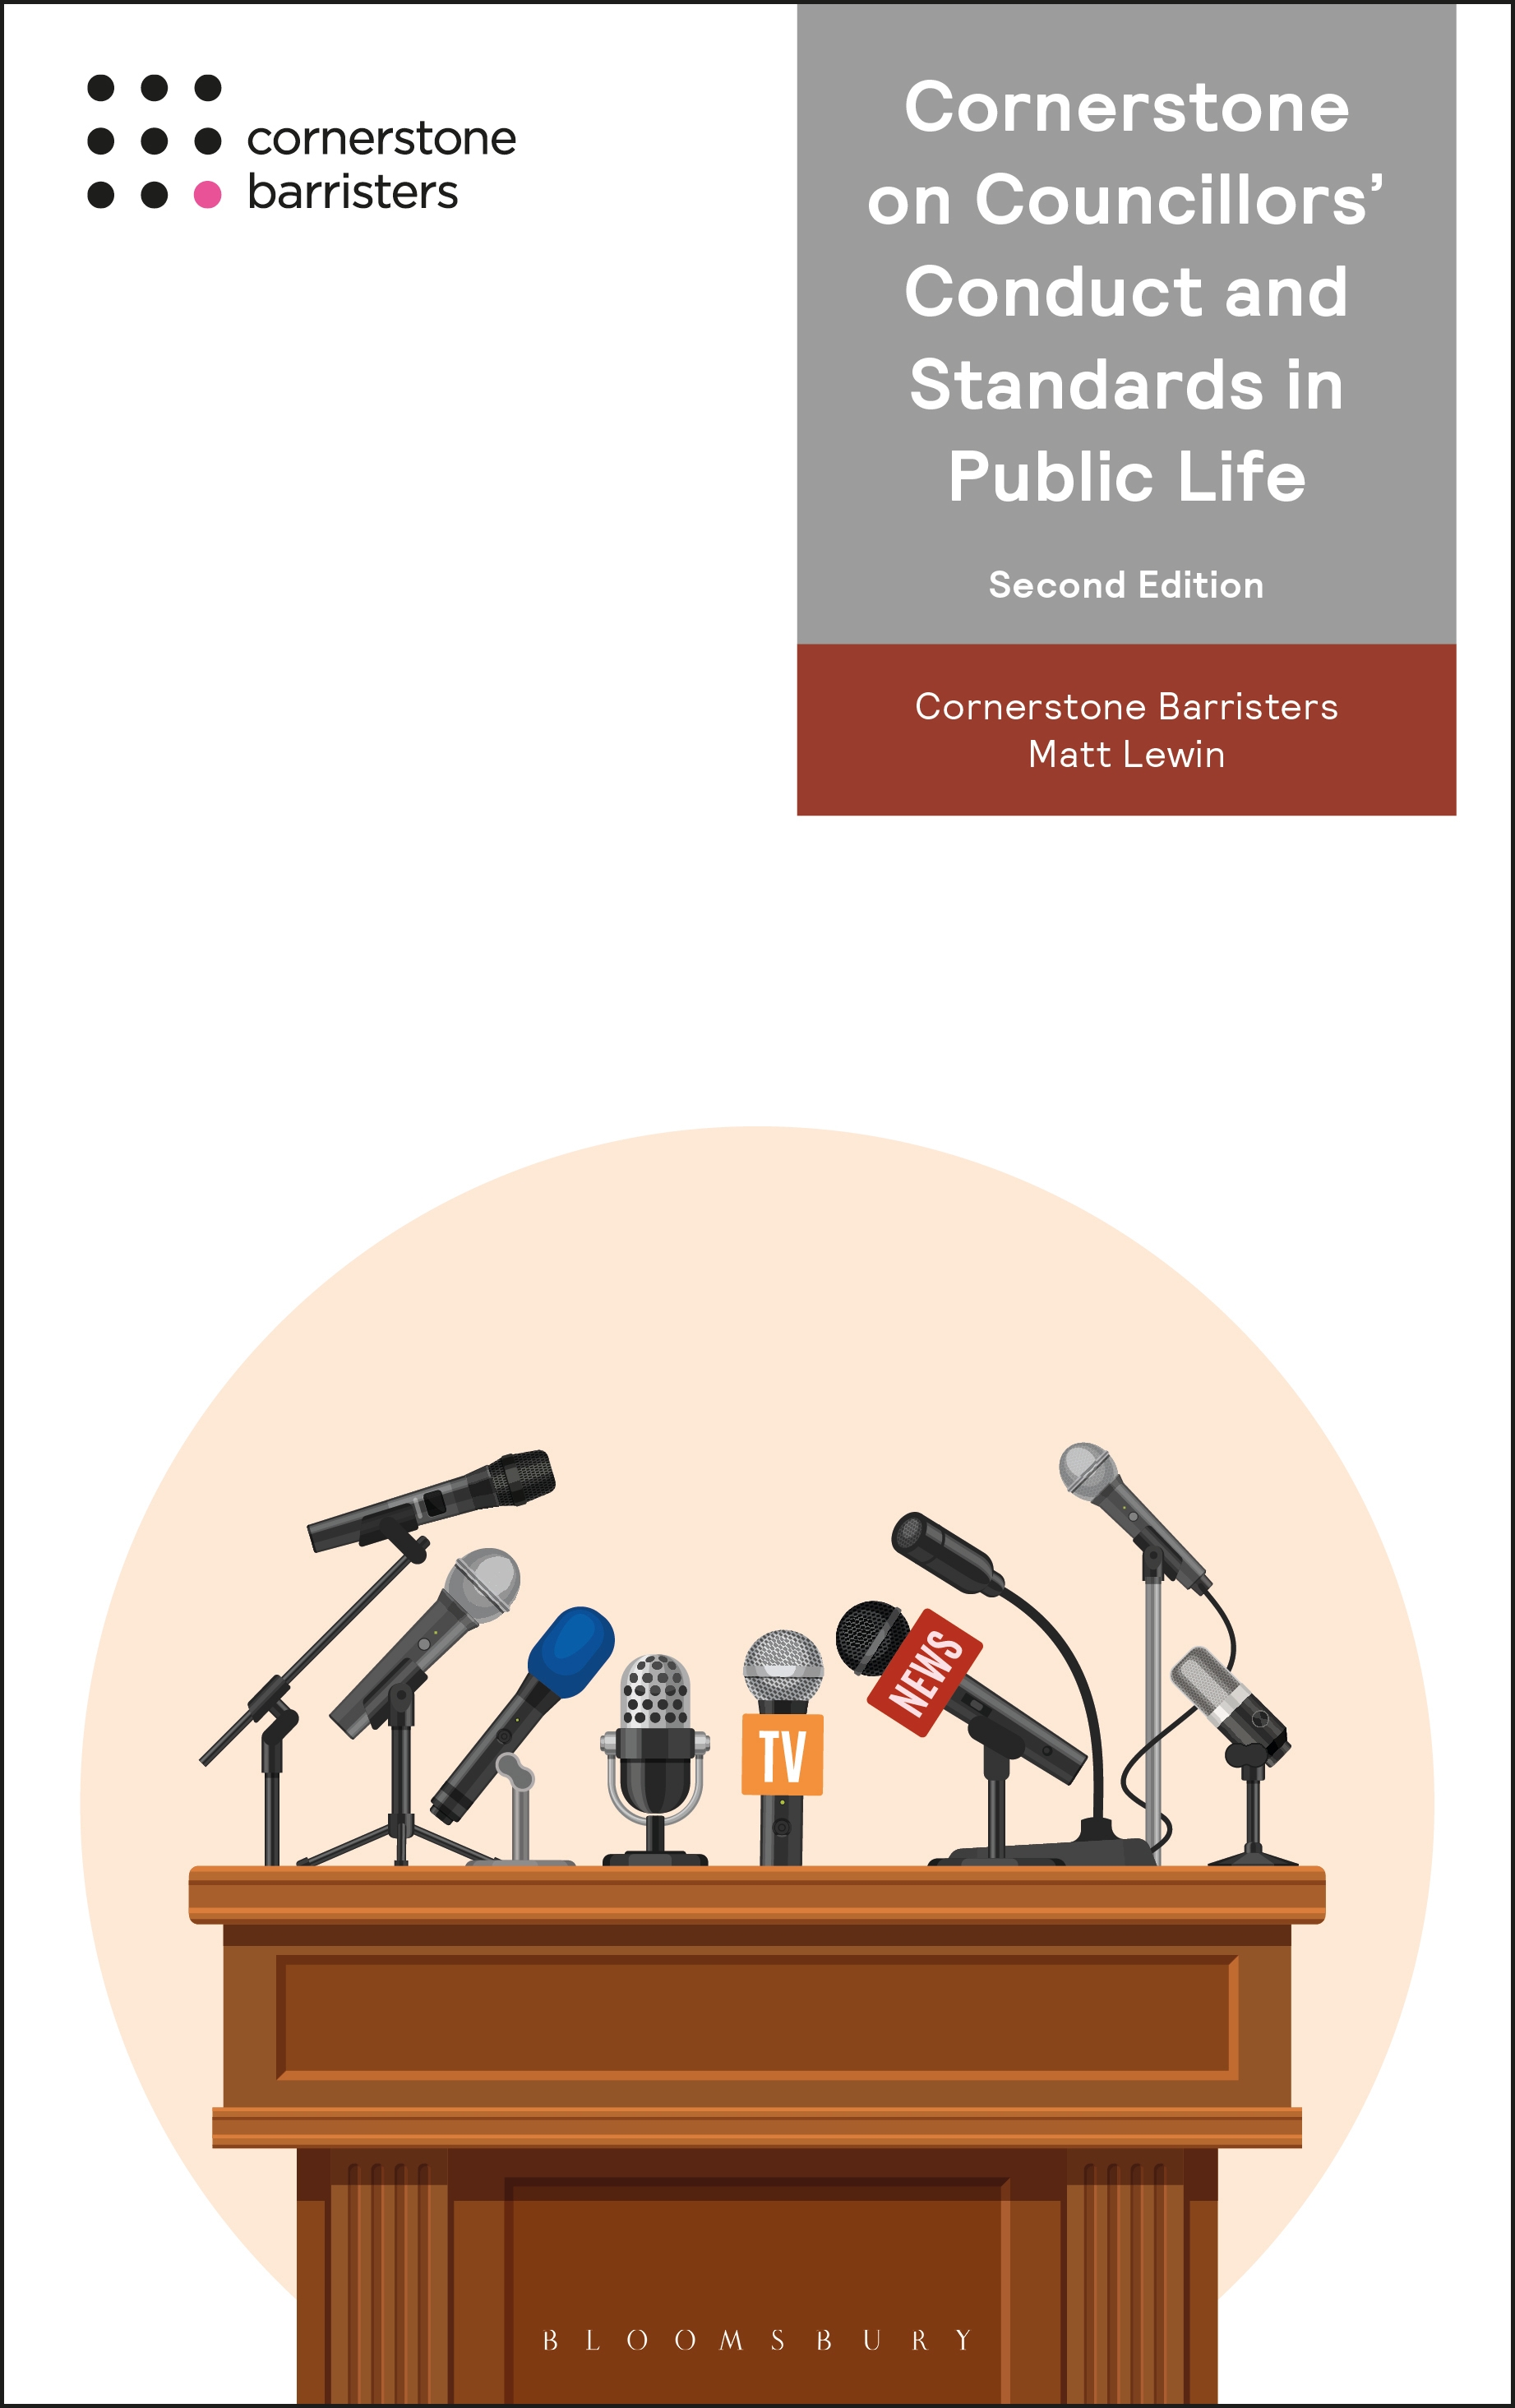 Cornerstone on Councillors' Conduct and Standards in Public Life book jacket